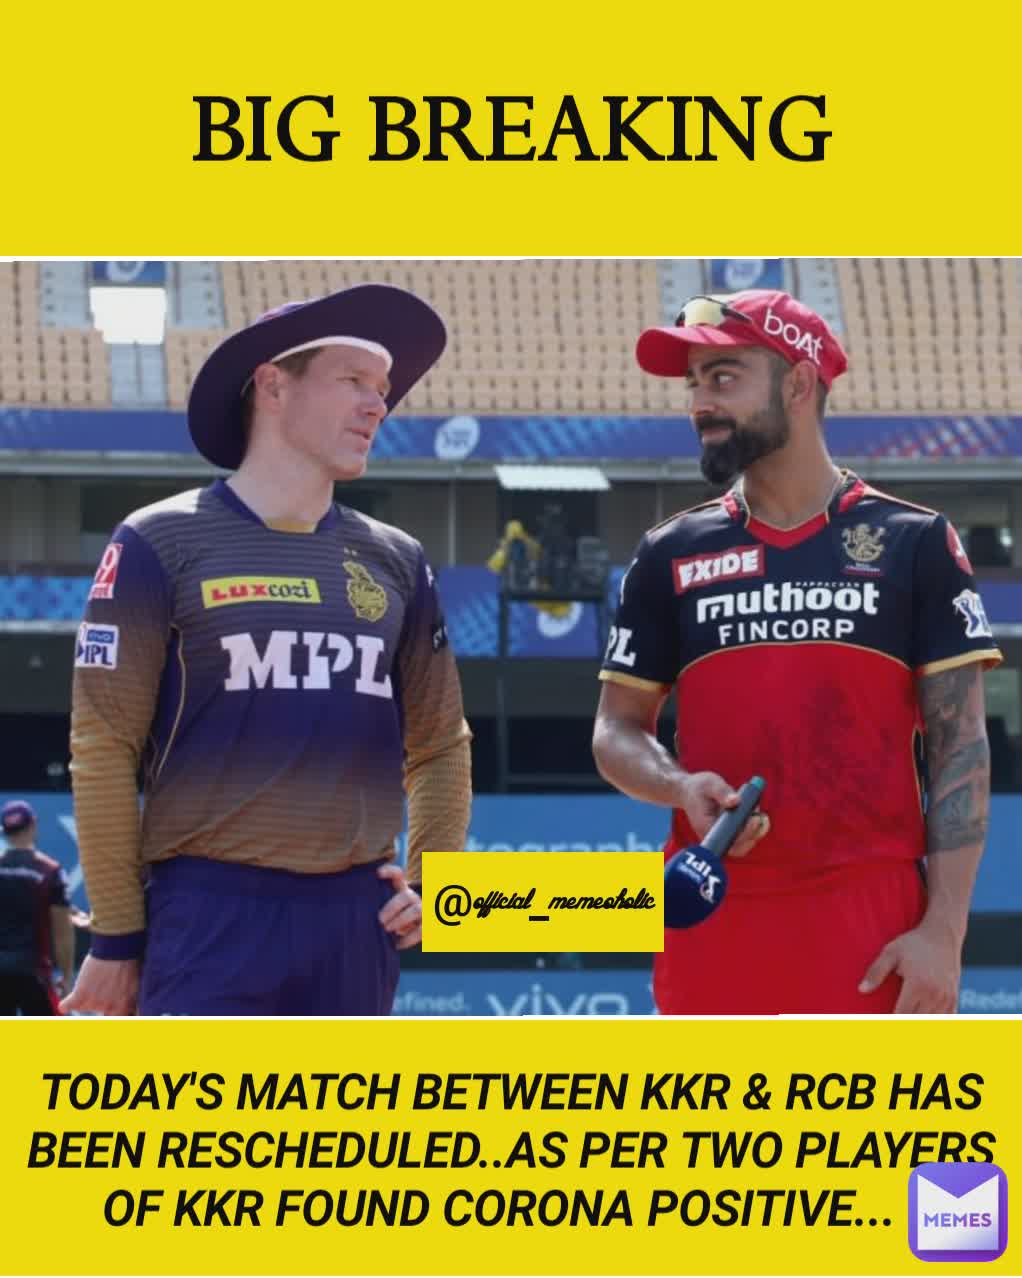 BIG BREAKING TODAY'S MATCH BETWEEN KKR & RCB HAS BEEN RESCHEDULED..AS PER TWO PLAYERS OF KKR FOUND CORONA POSITIVE... @Official_Memeoholic @official_memeoholic @official_memeoholic